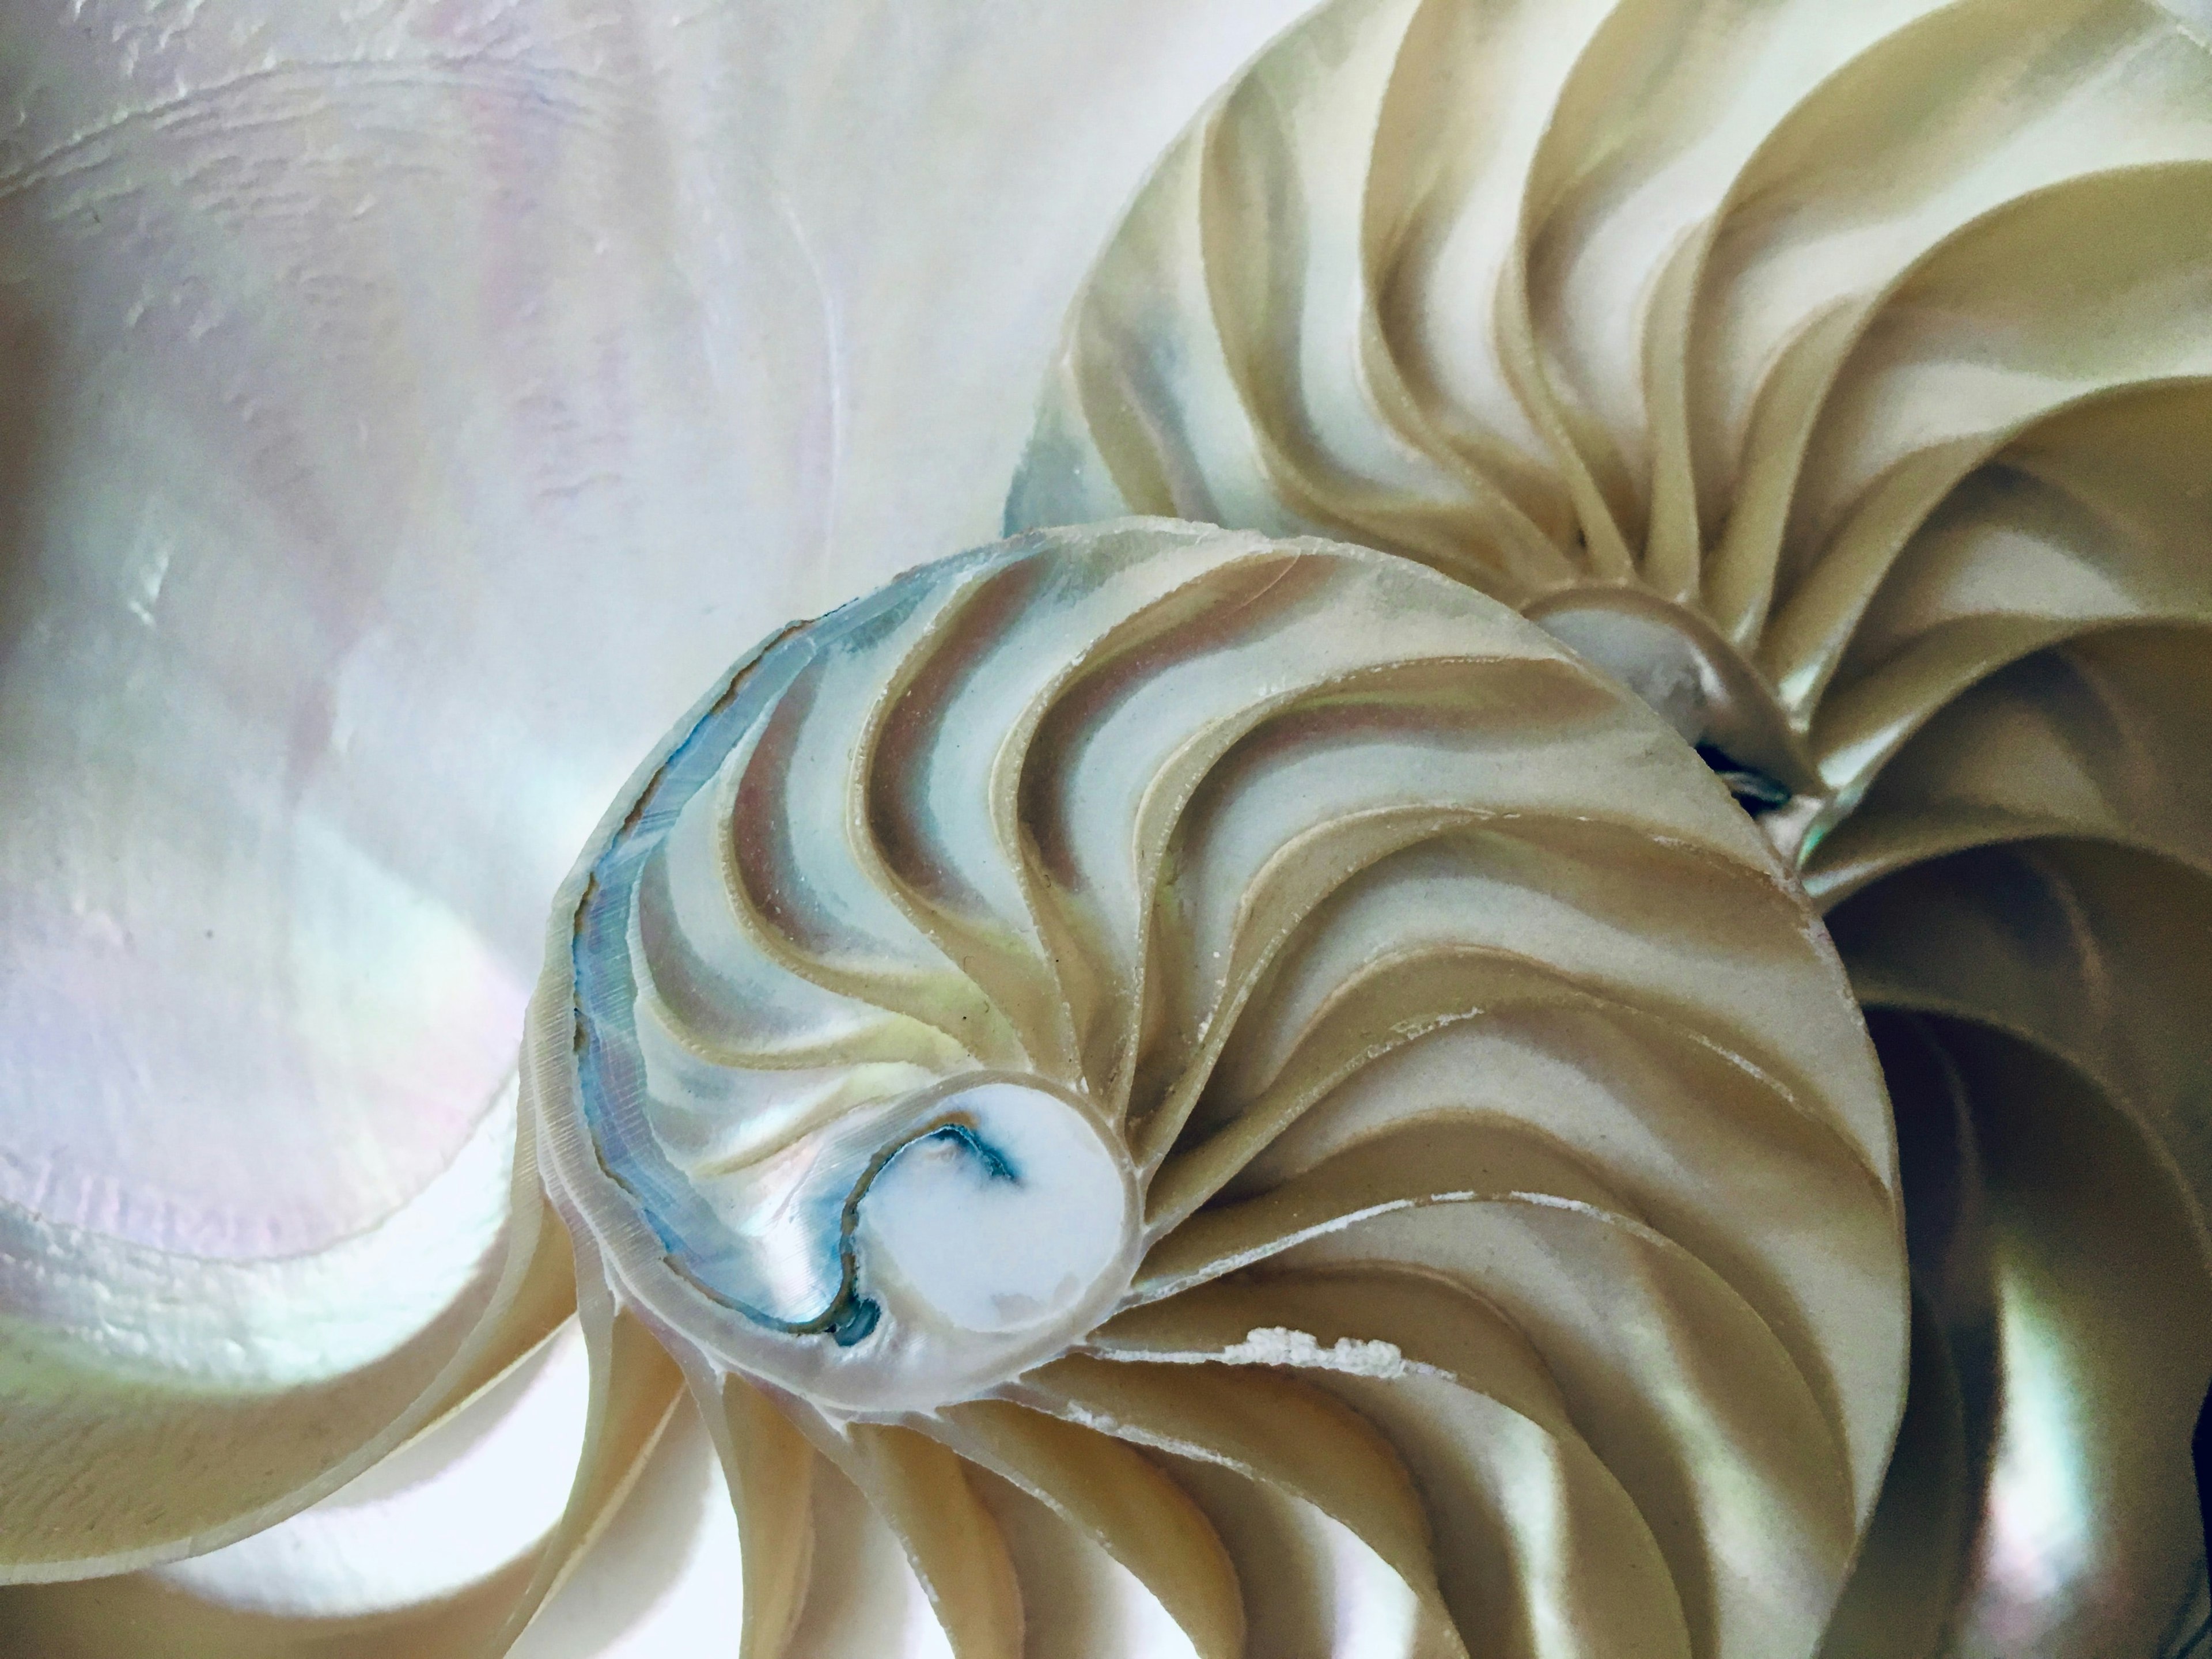 Inside of a shell demonstrating the Fibonacci sequence